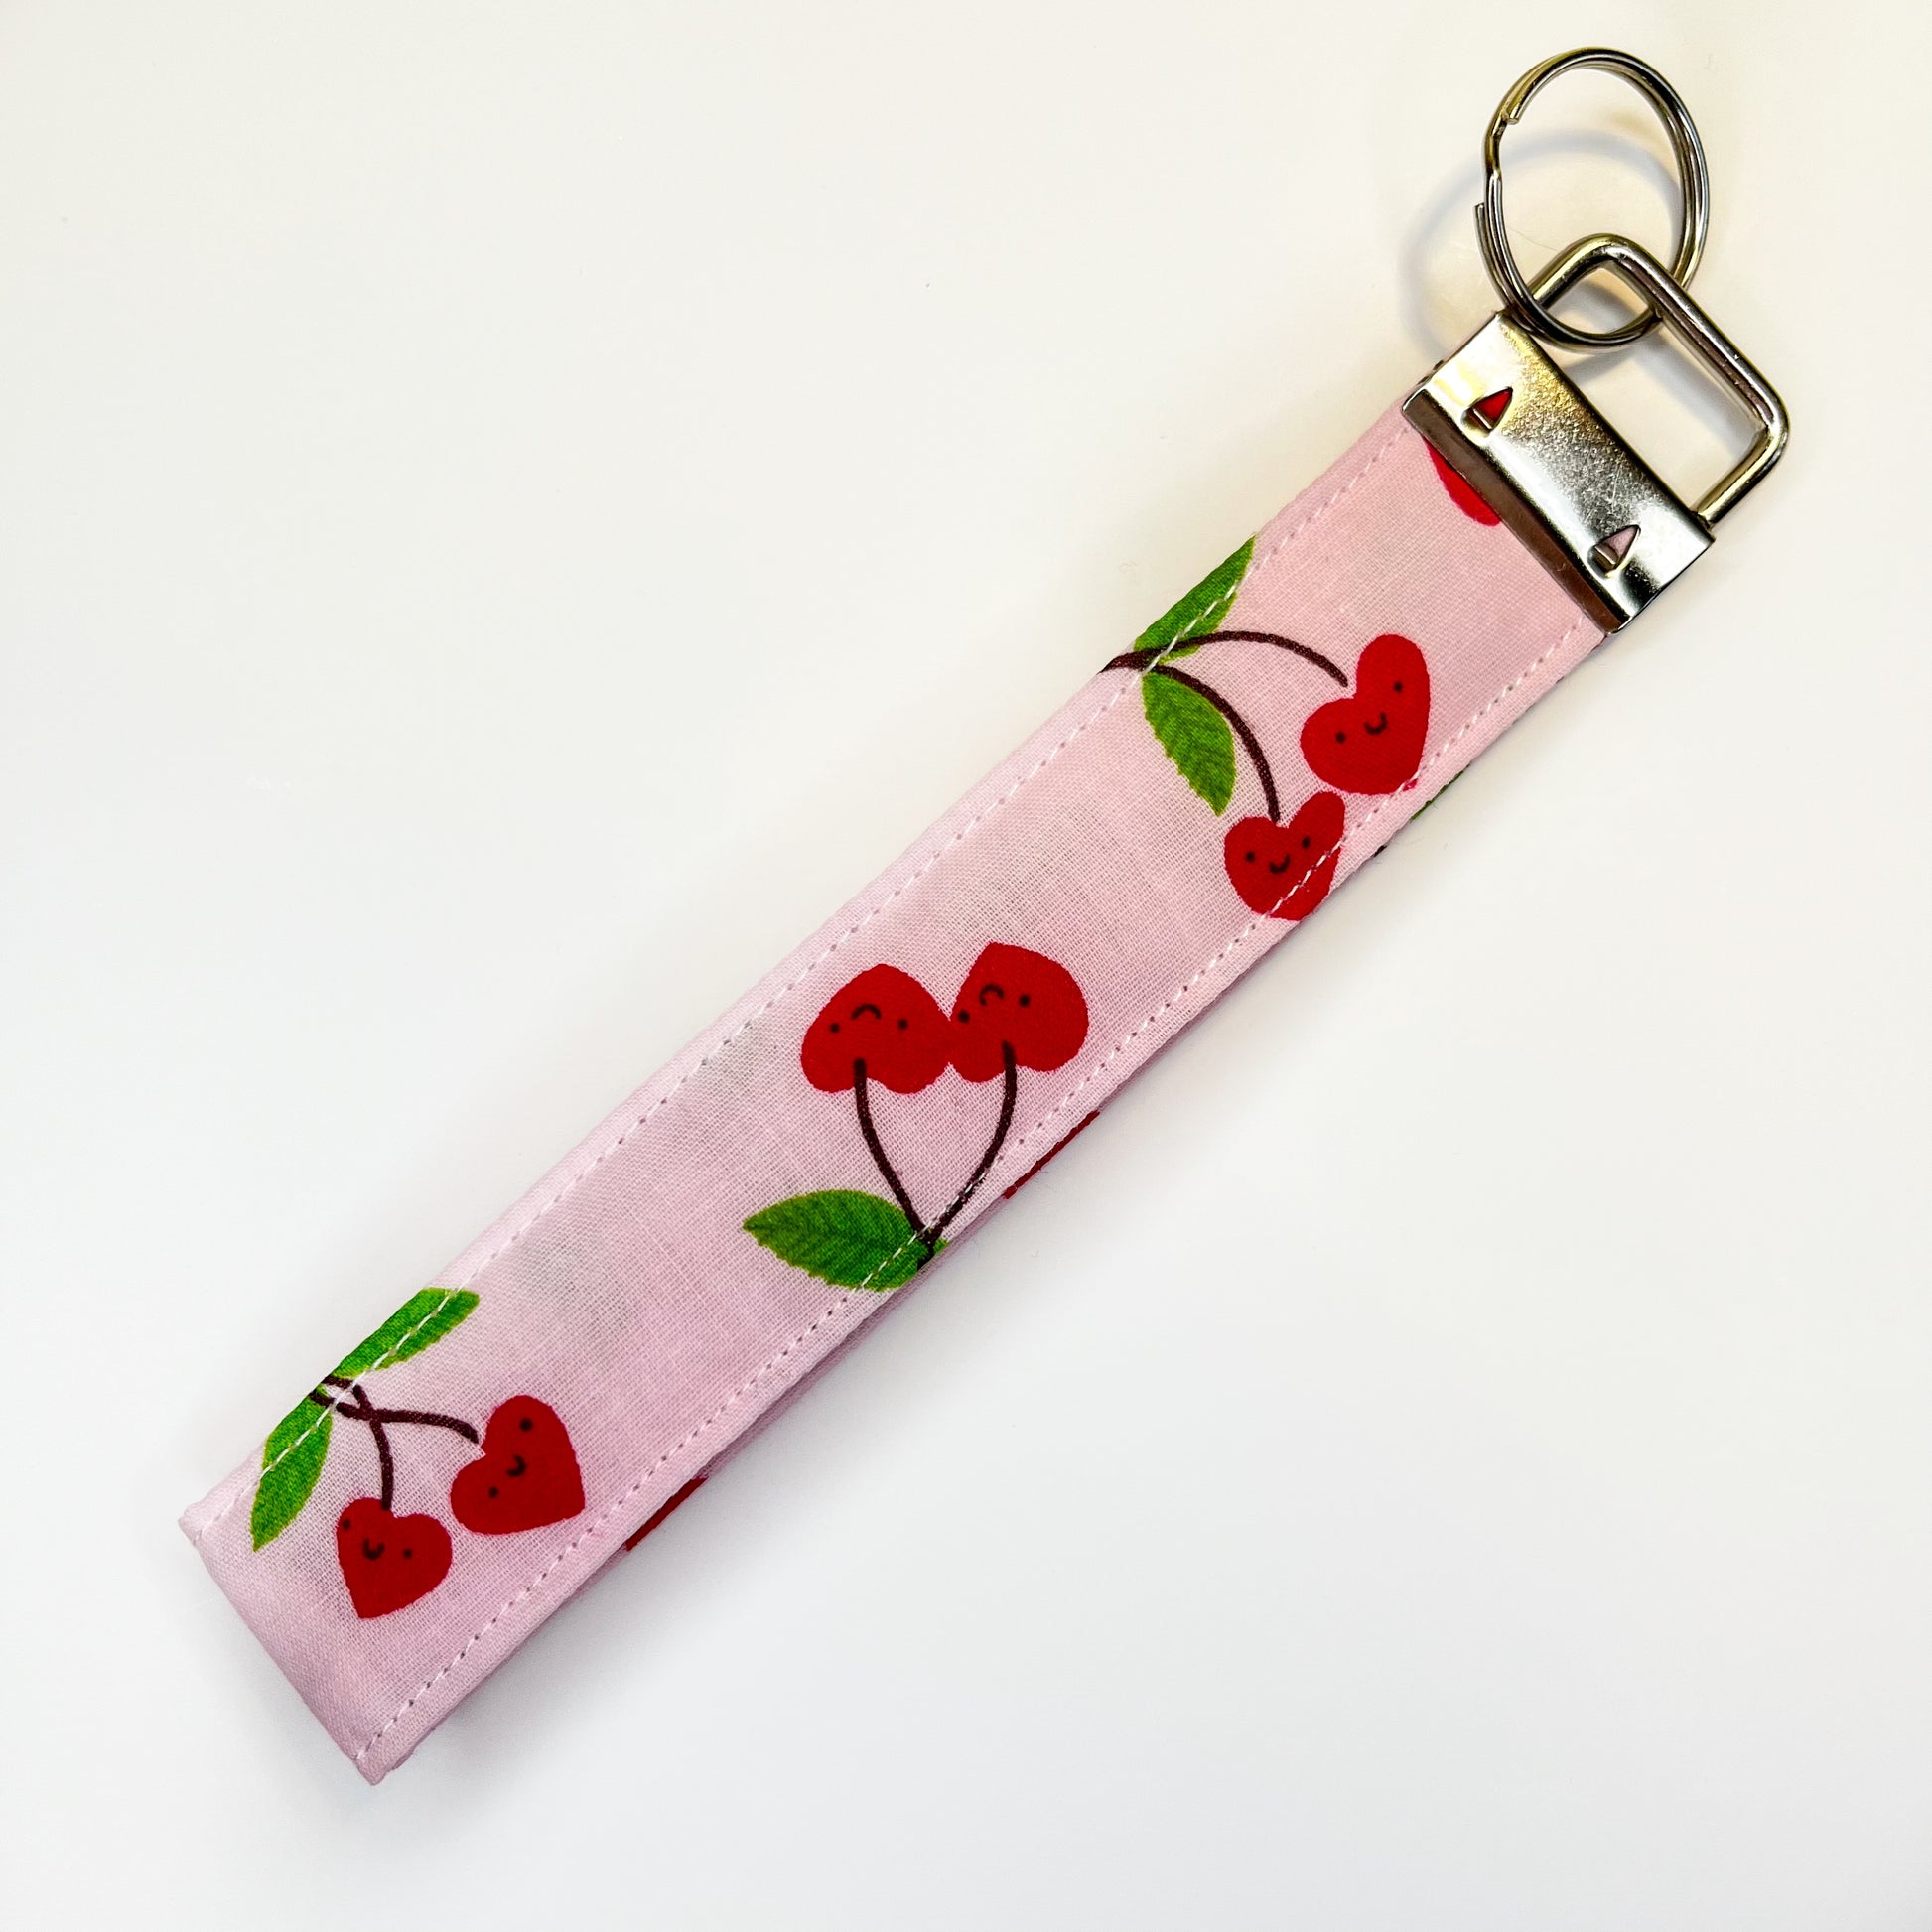 A Red Cherry Keychain